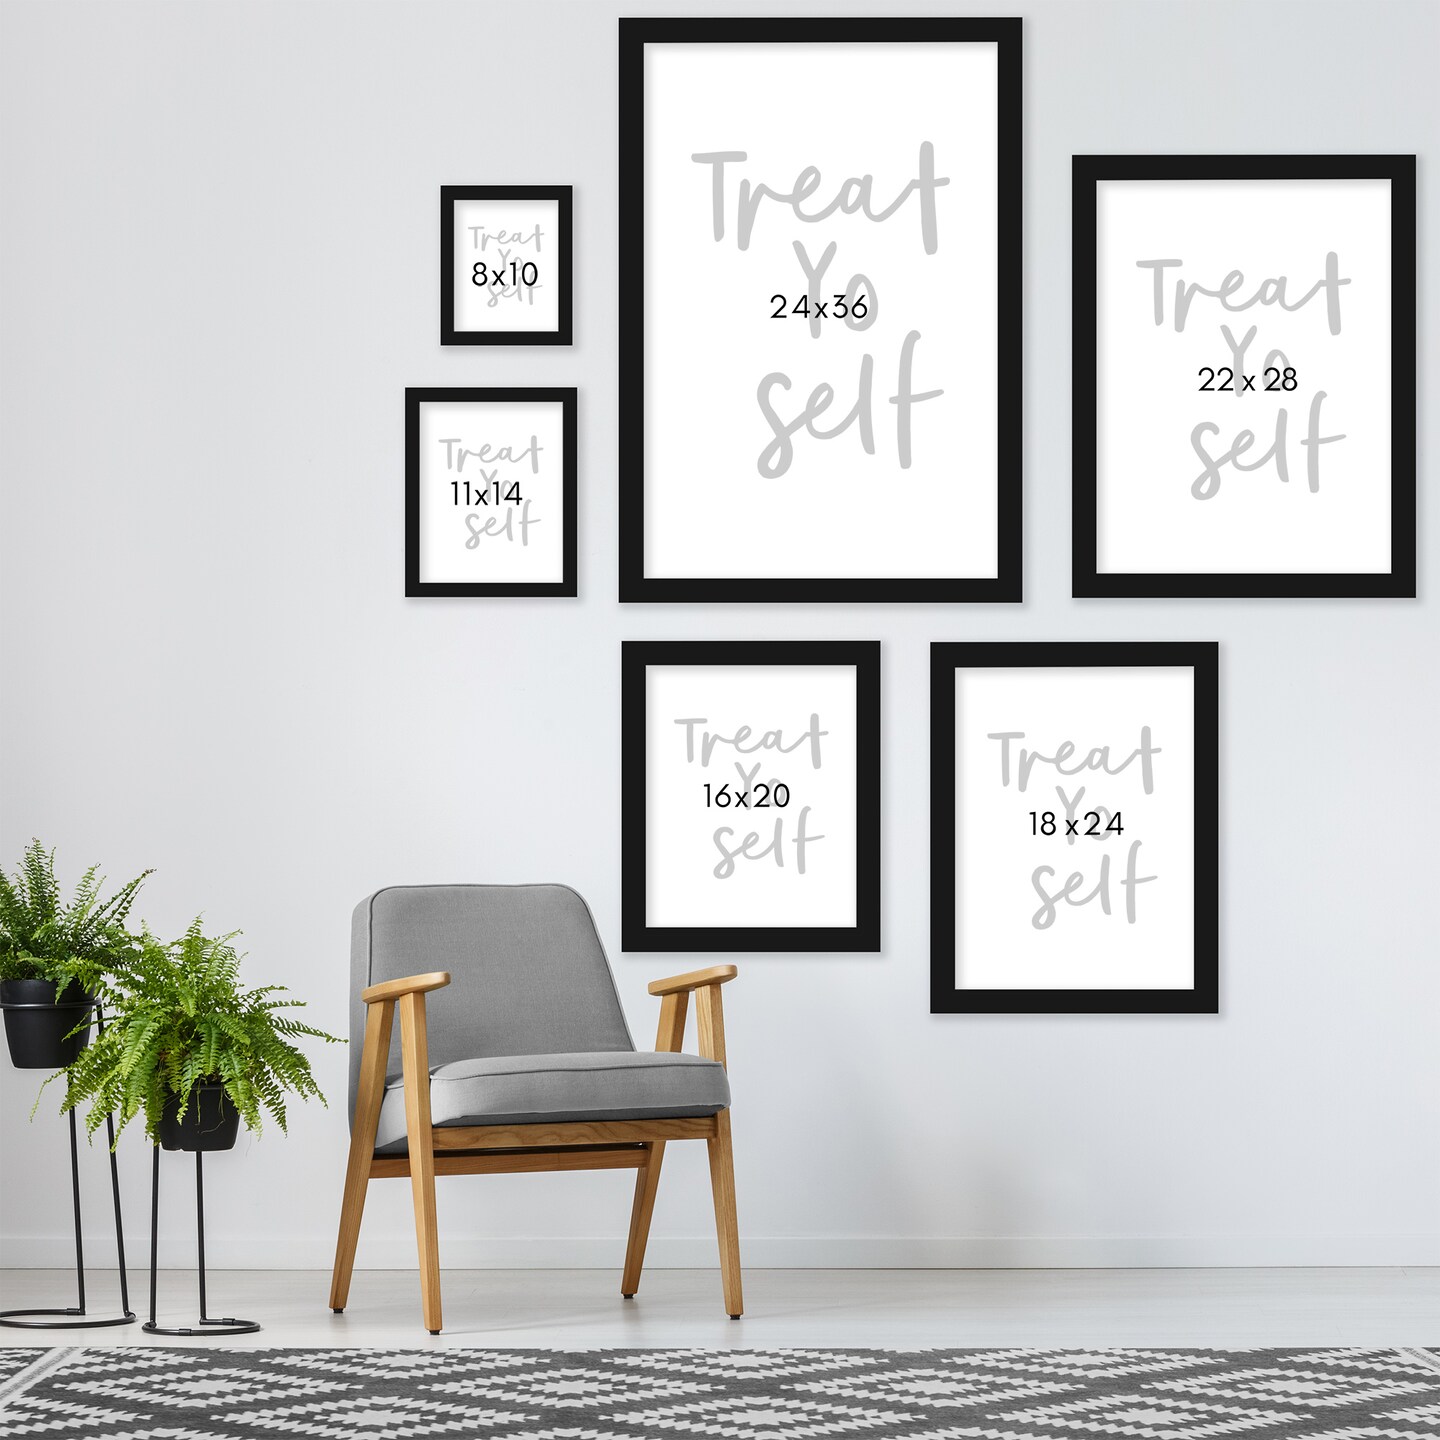 Treat Yo Self by Motivated Type Frame  - Americanflat